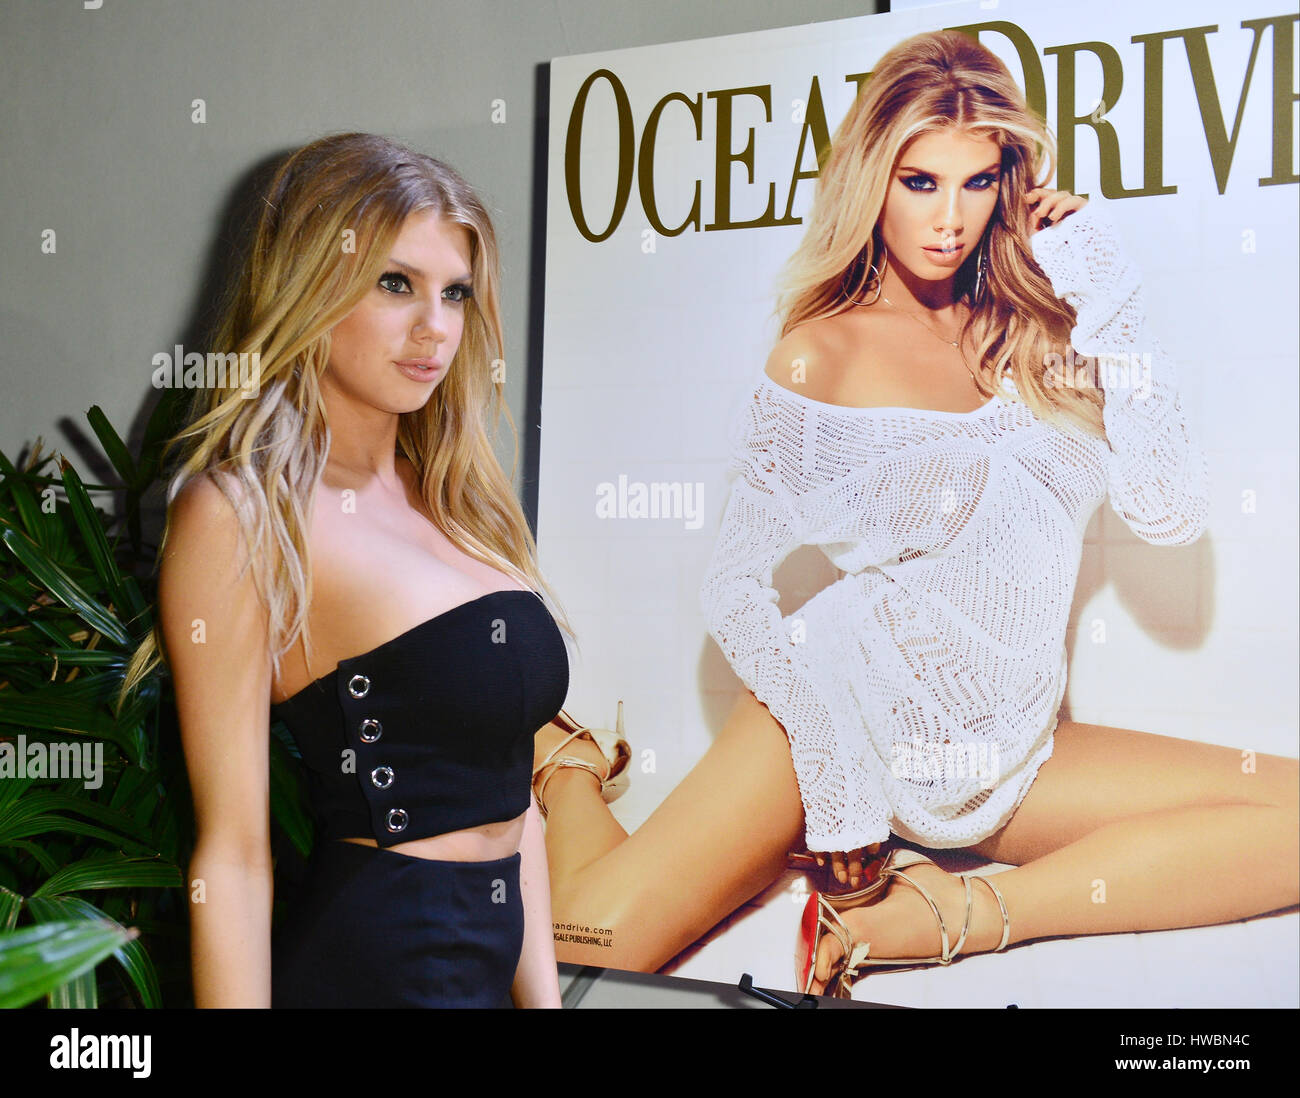 Ocean Drive Magazine Celebrates its February Issue with Cover Star